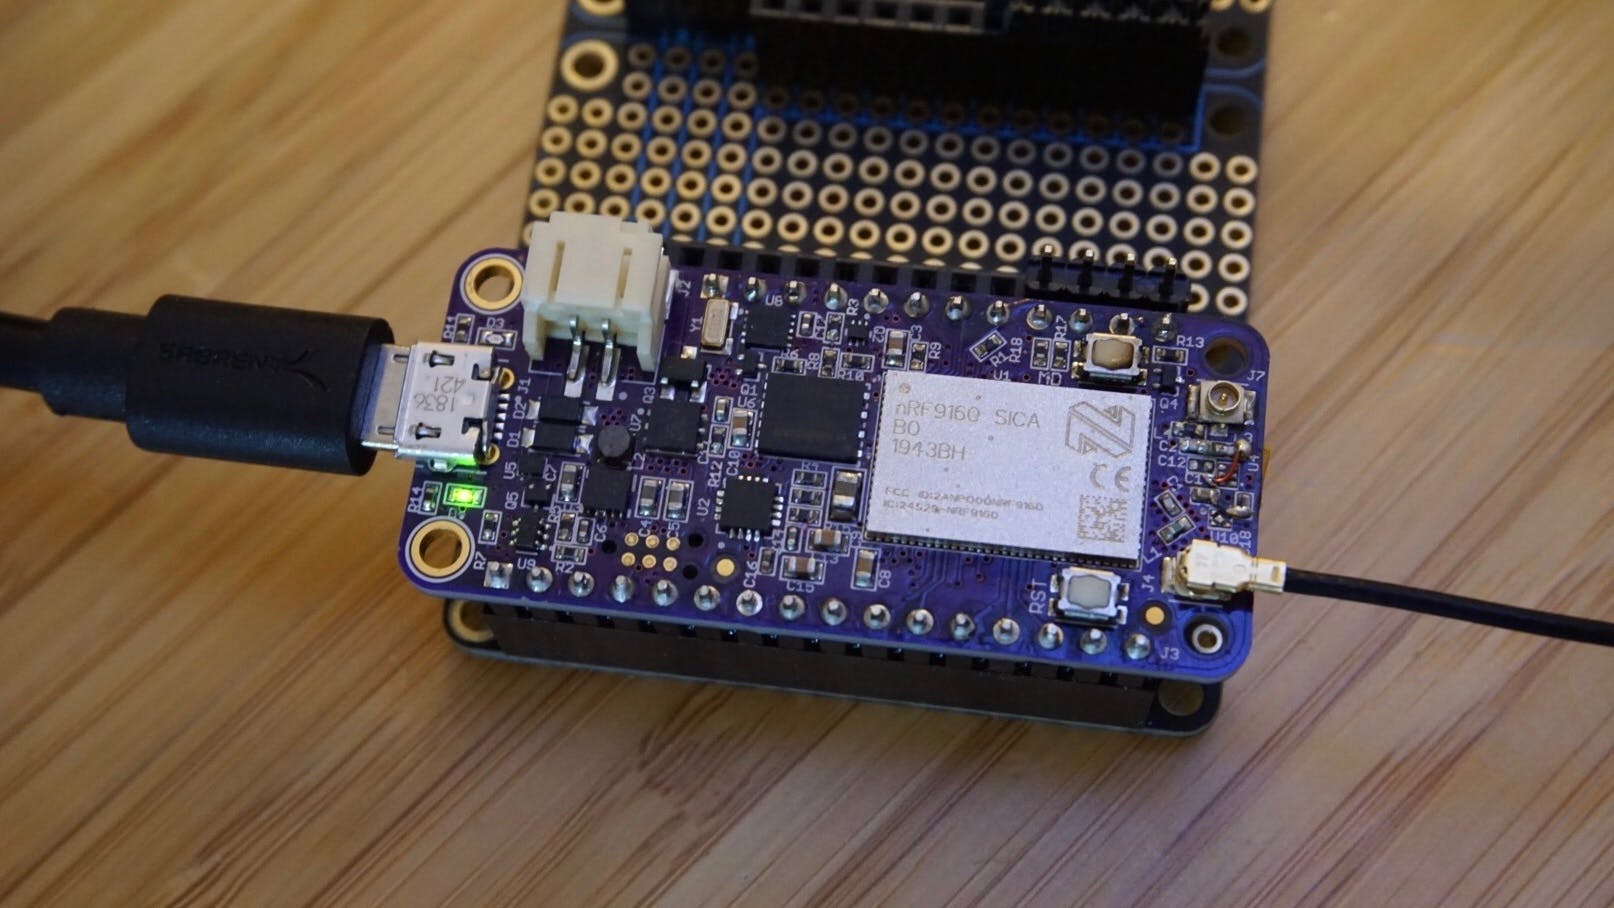 The nRF9160 Feather Connects! - Hackster.io